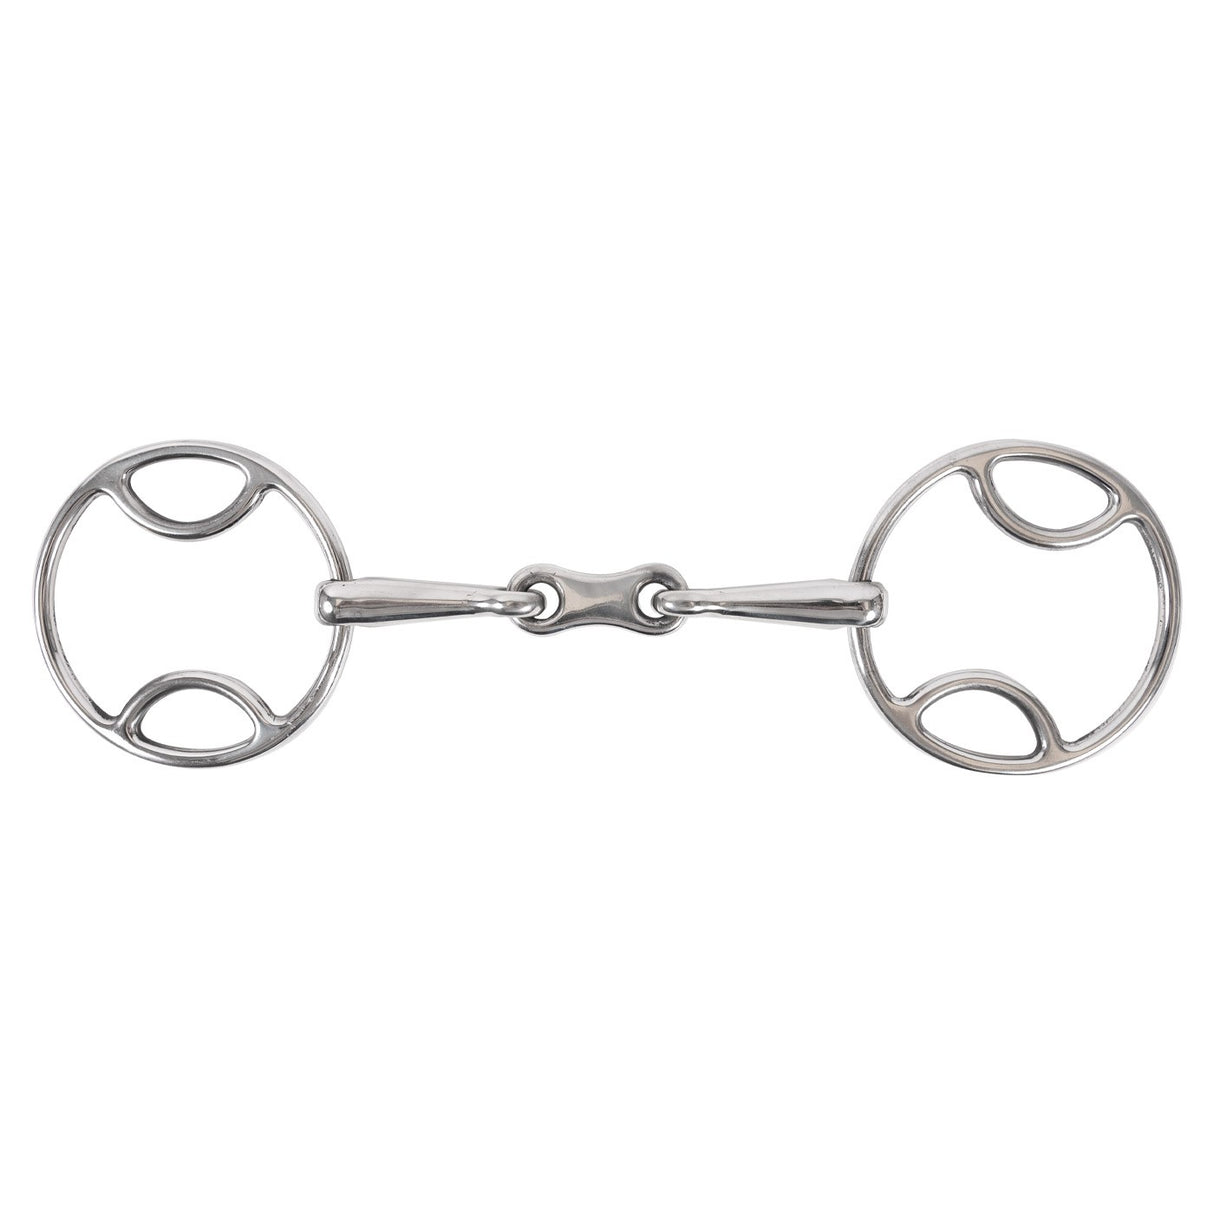 EvoEq Loop Ring French Link Bit